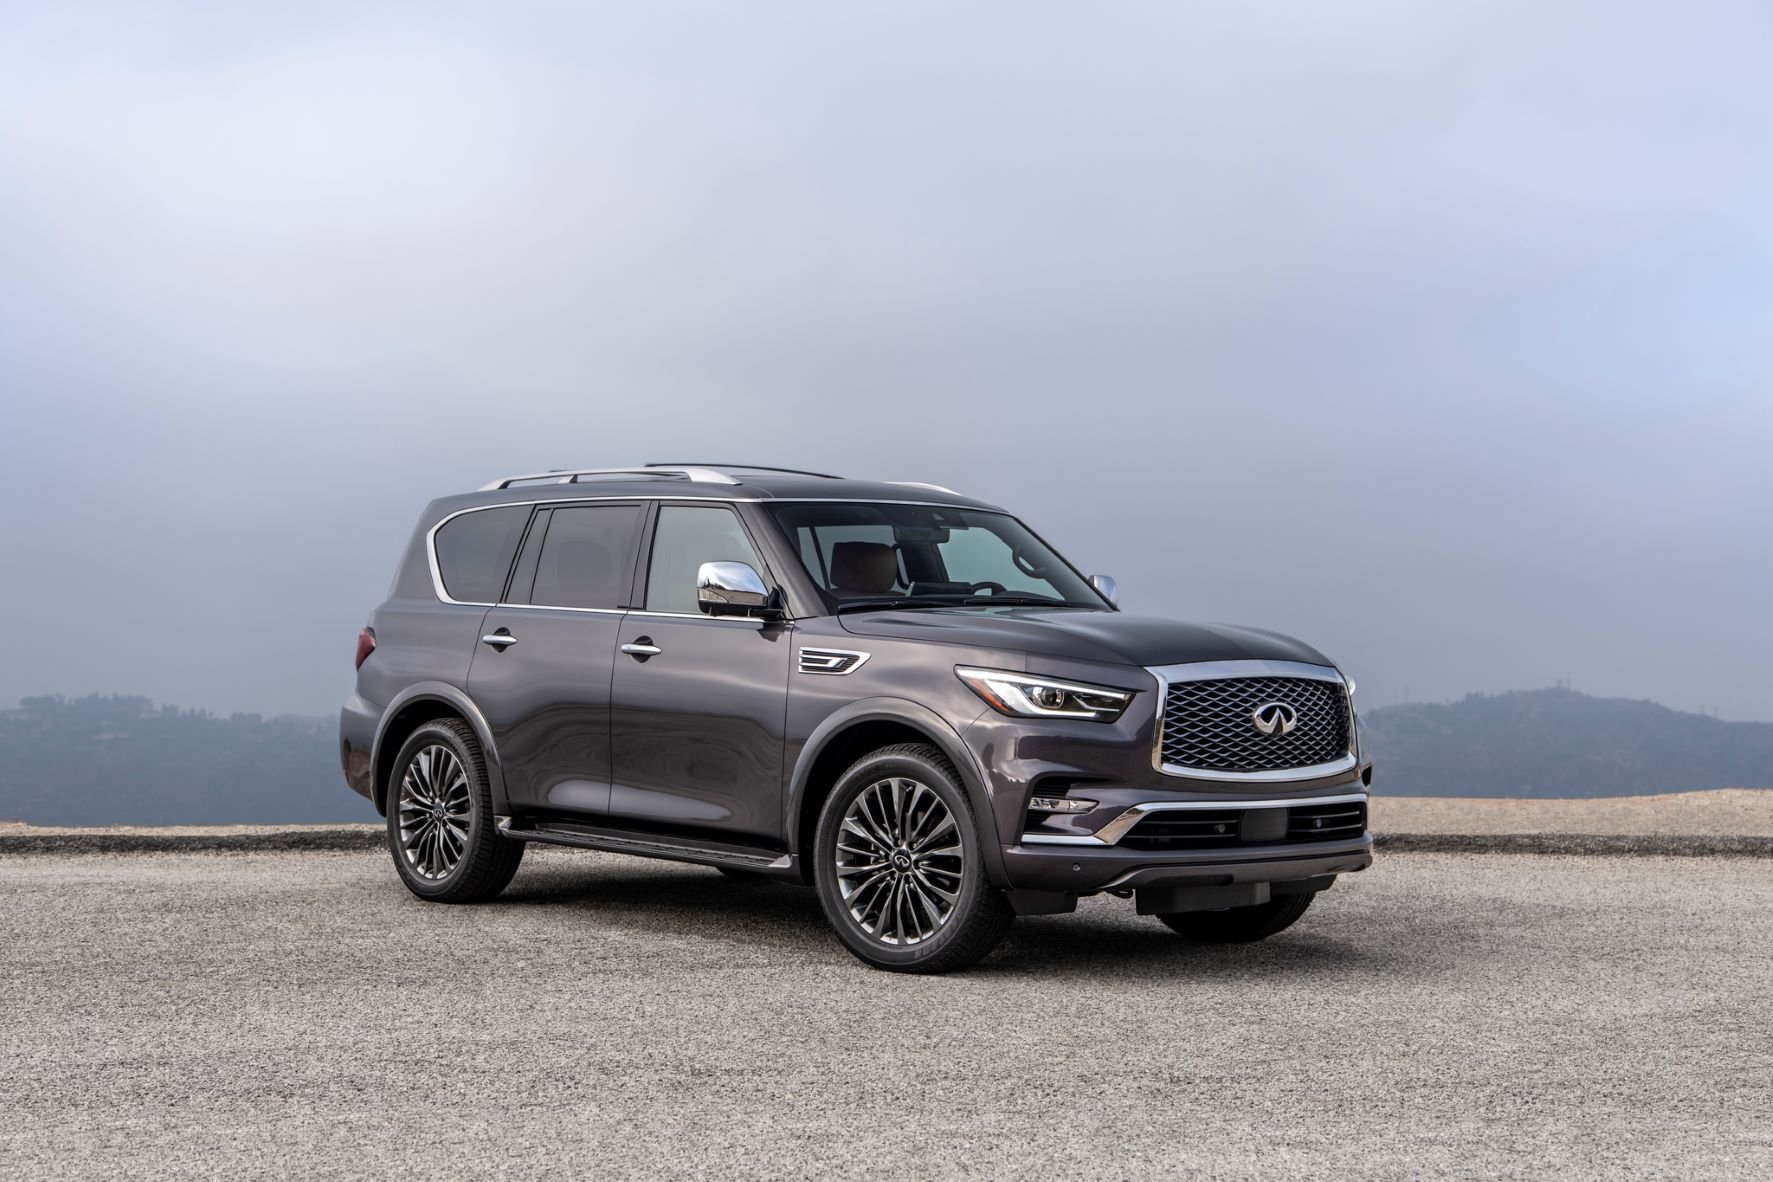 INFINITI QX80: The Ultimate SUV Experience of Power, Luxury, and Innovative Safety